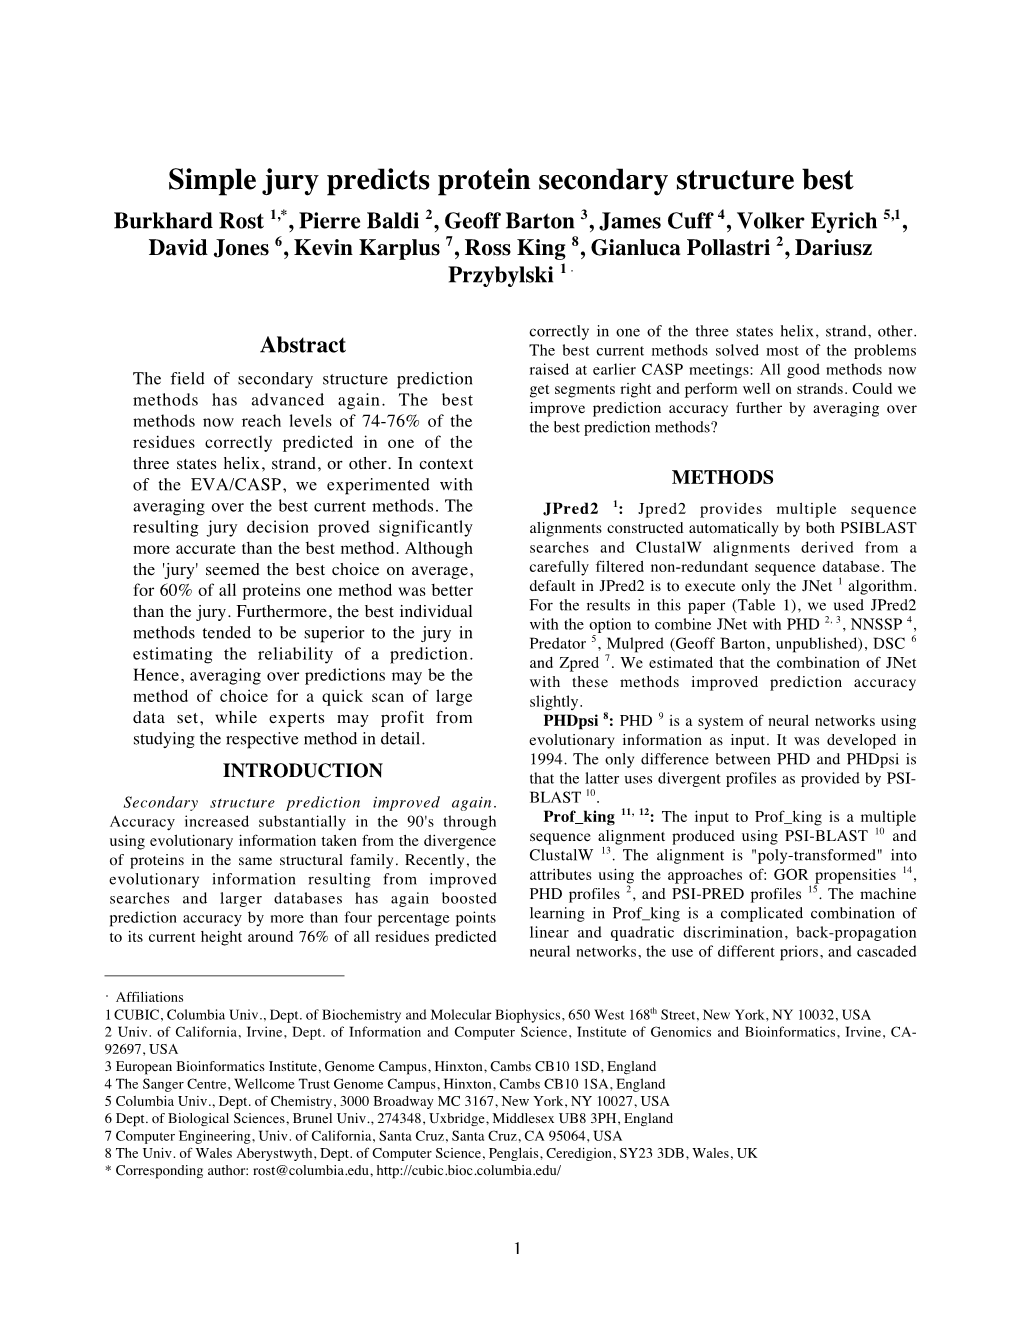 Simple Jury Predicts Protein Secondary Structure Best